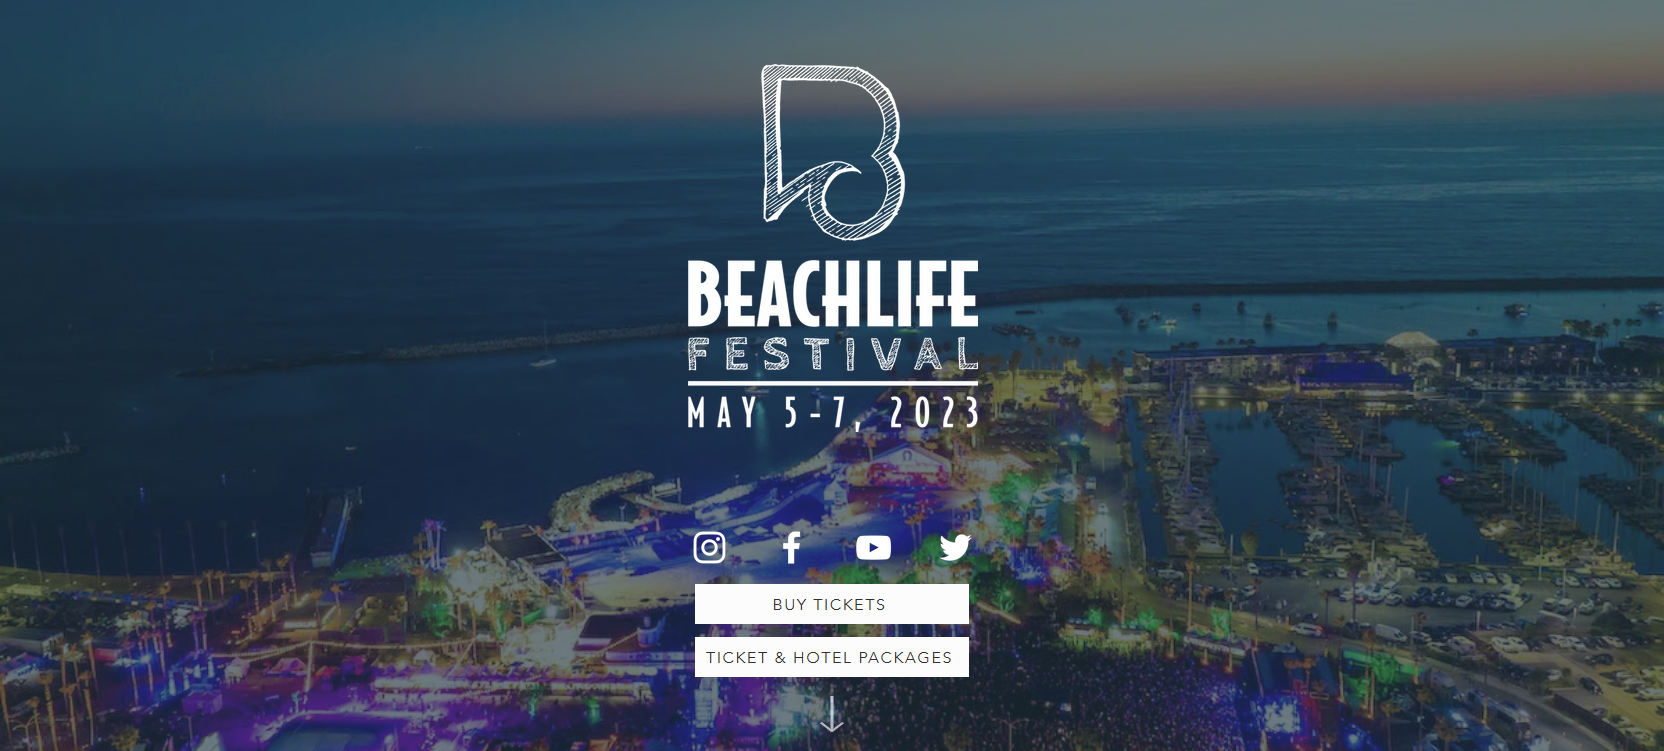 Get Ready to Jam on the Beach: The 2023 Beach Life Festival in Redondo Beach is Here!